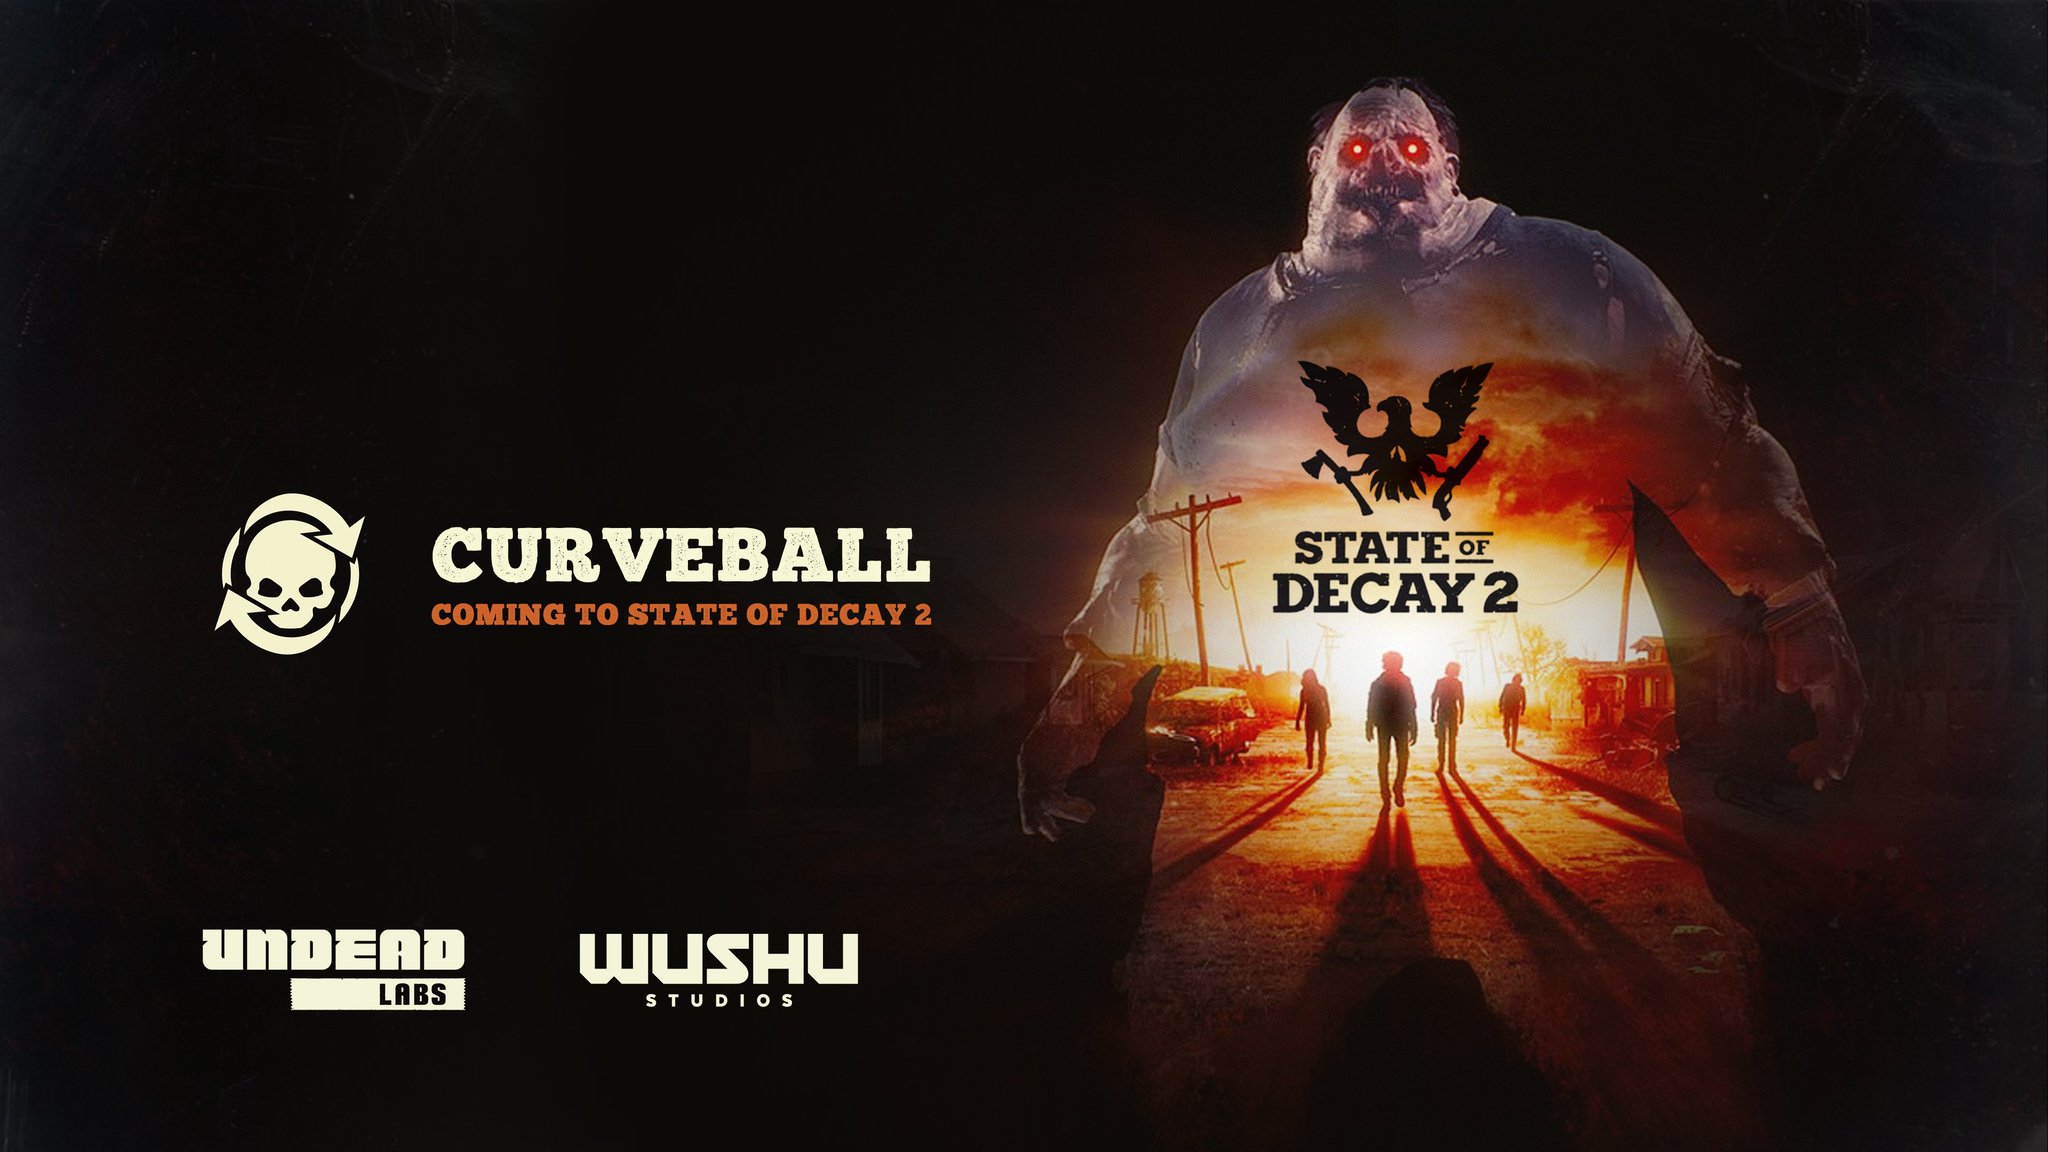 State of Decay 2's massive Curveball content update is arriving